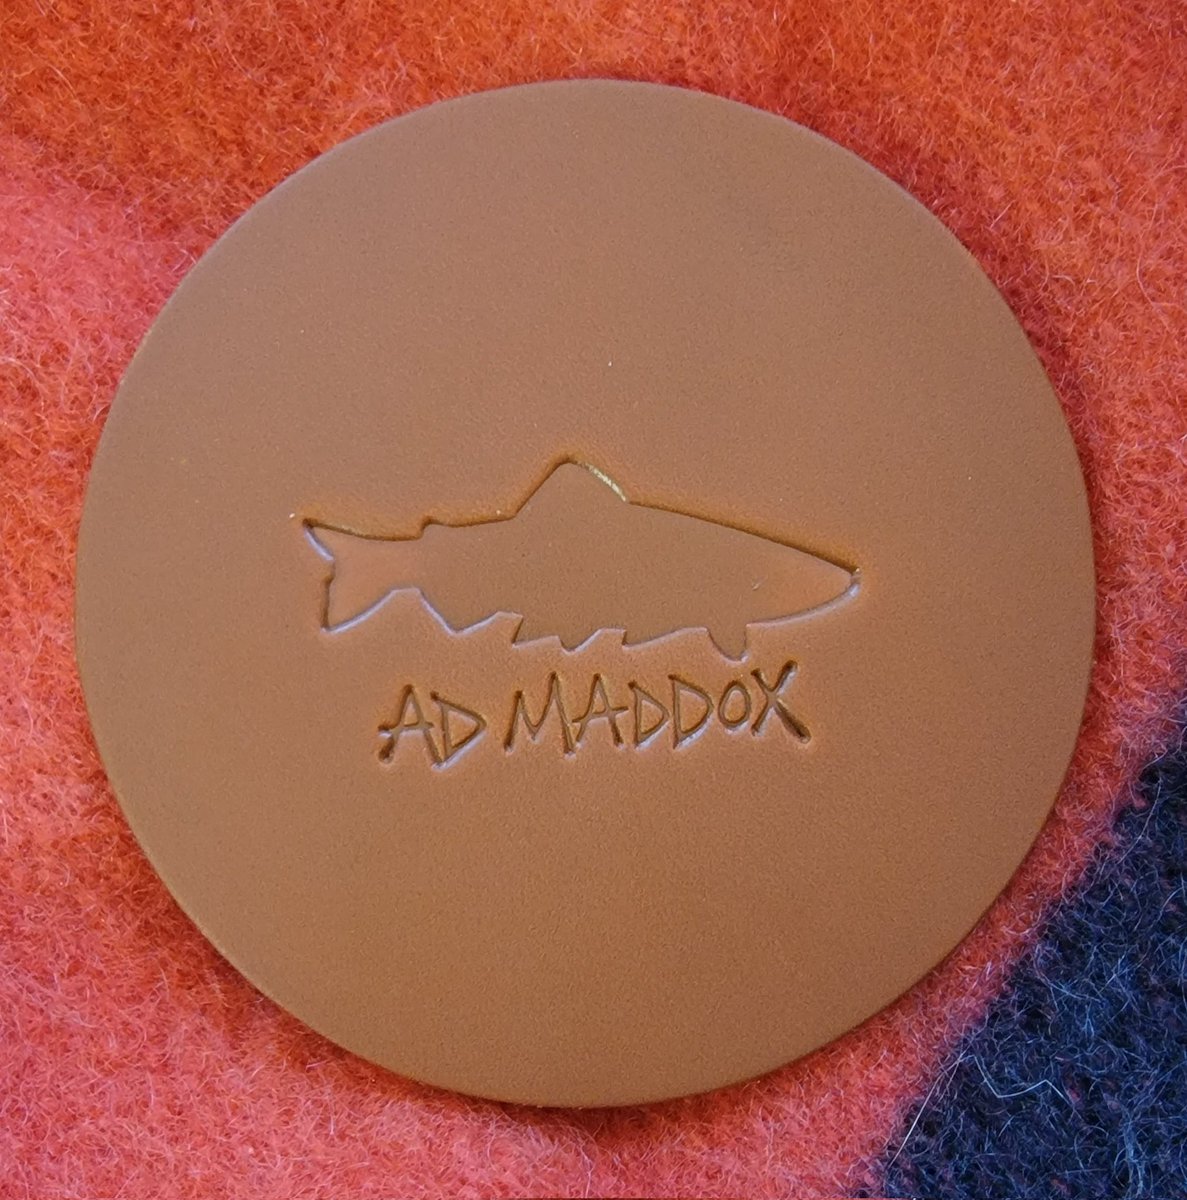 New logo for all my leather goods 🐟😍
admaddox.com 

#admaddoxart #admaddoxstudios #leathergoods #flyfishingmerchandise